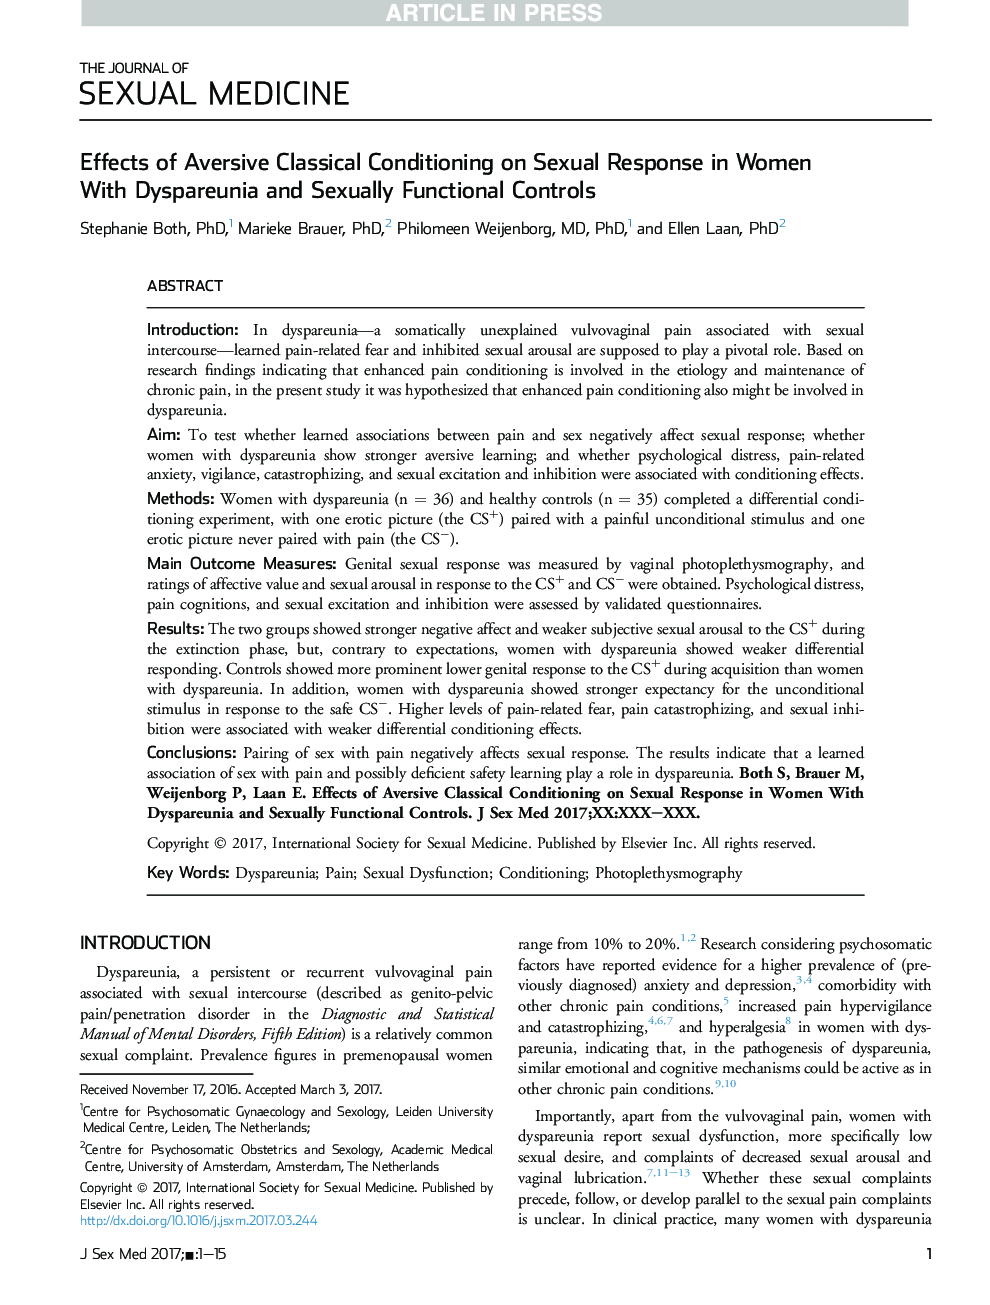 Effects of Aversive Classical Conditioning on Sexual Response in Women With Dyspareunia and Sexually Functional Controls